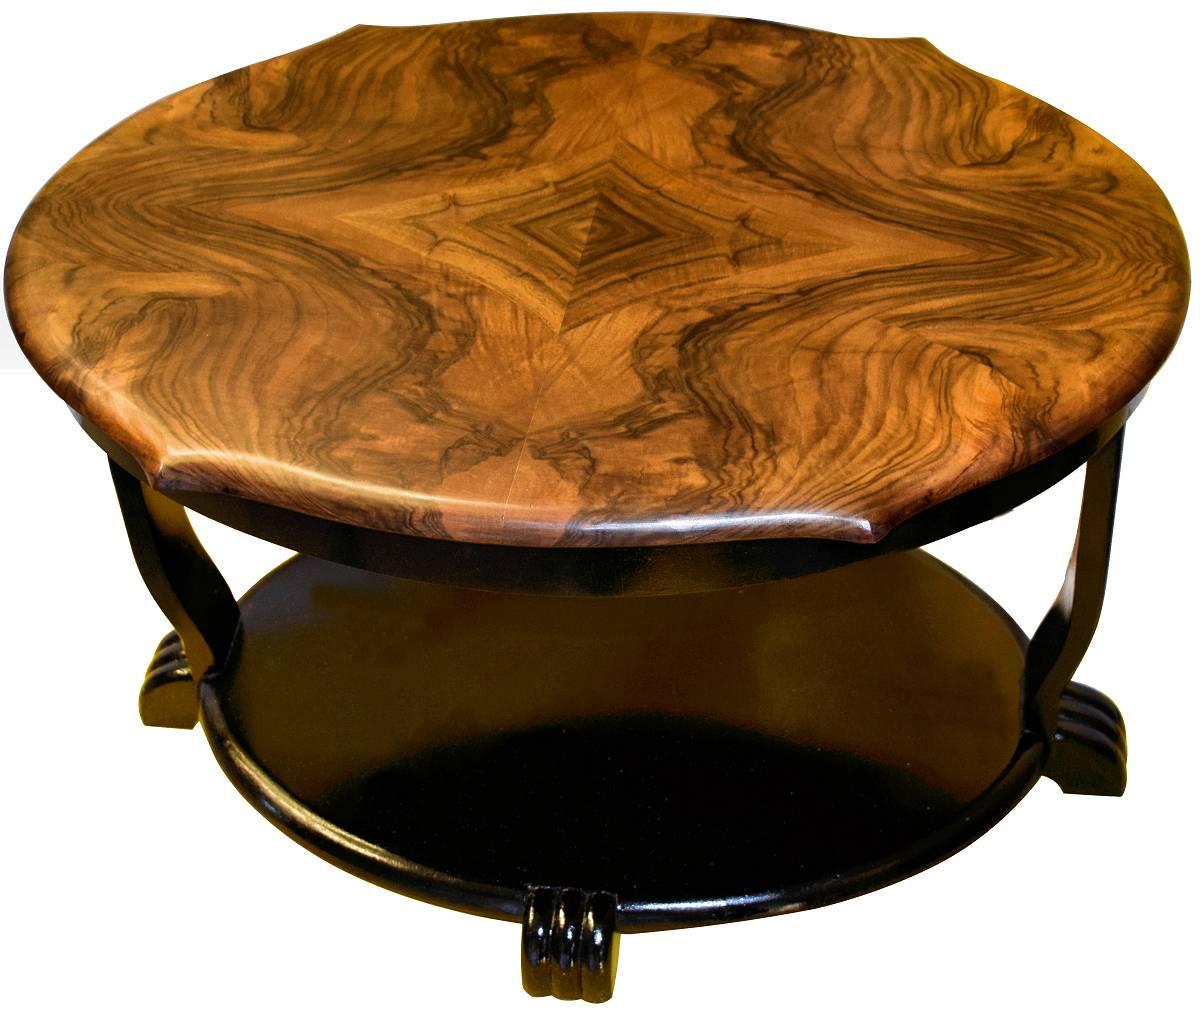 Art Deco coffee table dating to the 1930s with a beautifully quartered book-paged figured veneered walnut top. The rest is ebonised with reeded legs and feet. Having been newly restored this is in excellent condition.